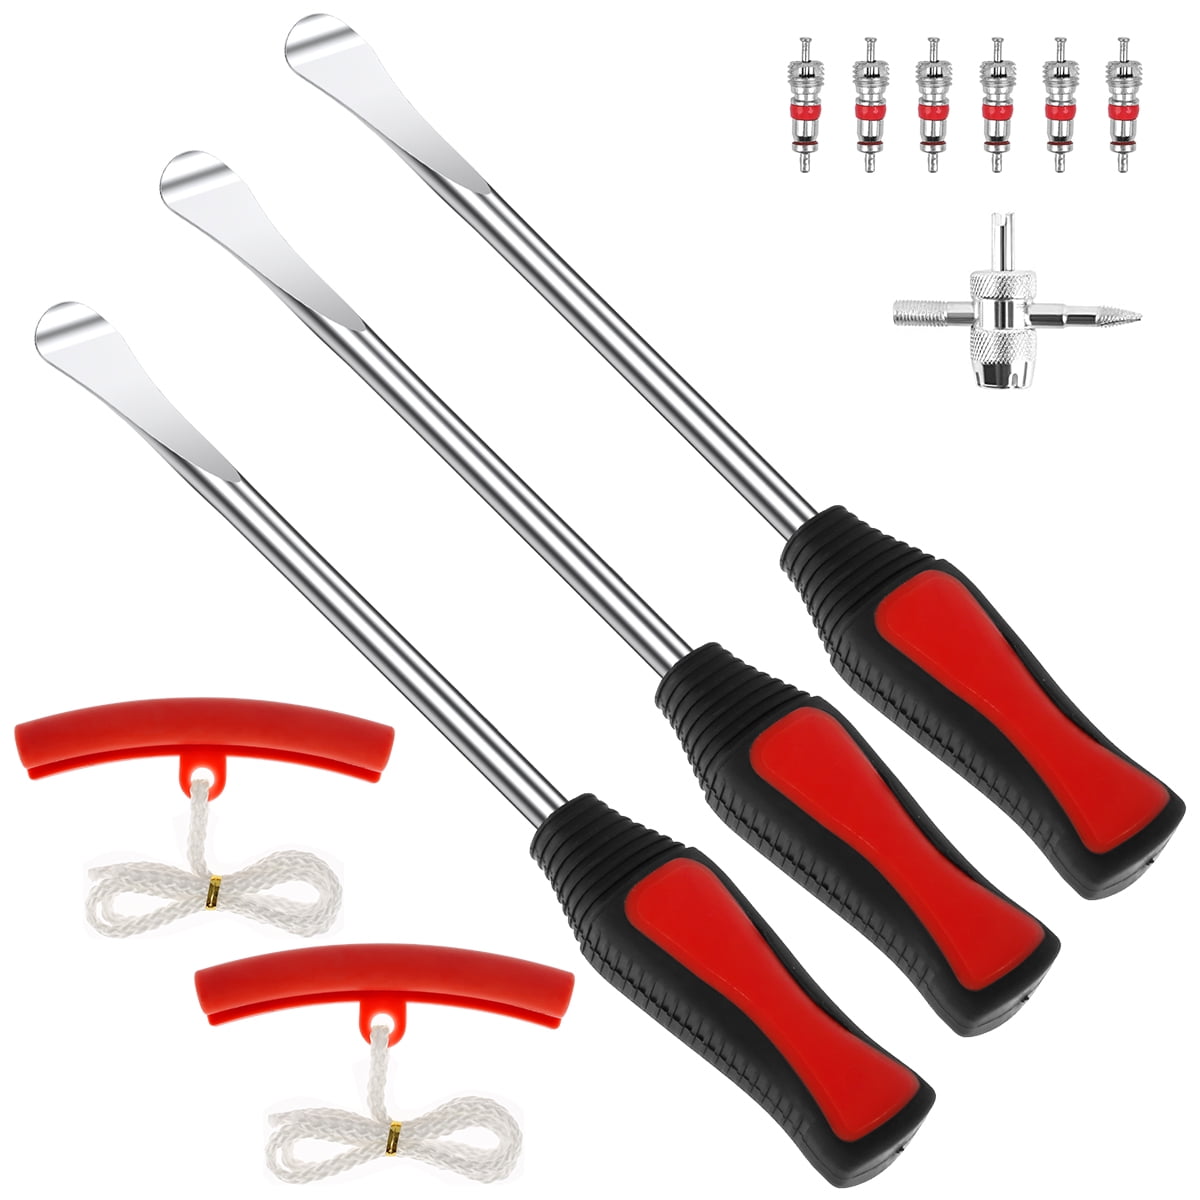 Dr.Roc 14.5 Perfect Leverage Tire Spoon Lever Iron Tool Kit Motorcycle Bike Professional Tire Change Kit w/Durable Bag - 3 PCS Tire Spoons+Valve Tool with 6 Valve Cores 